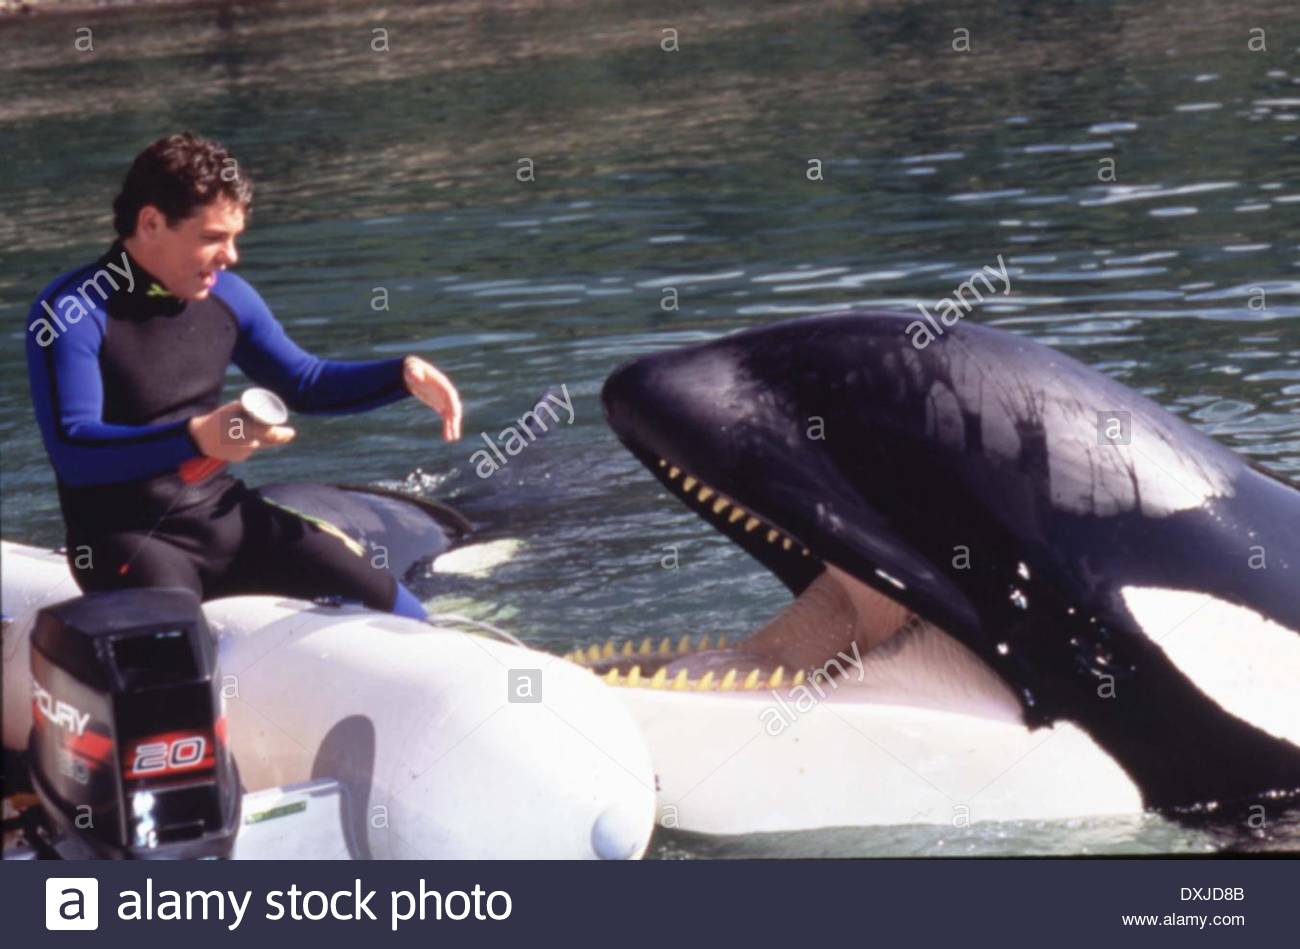 Amazing Free Willy 3: The Rescue Pictures & Backgrounds